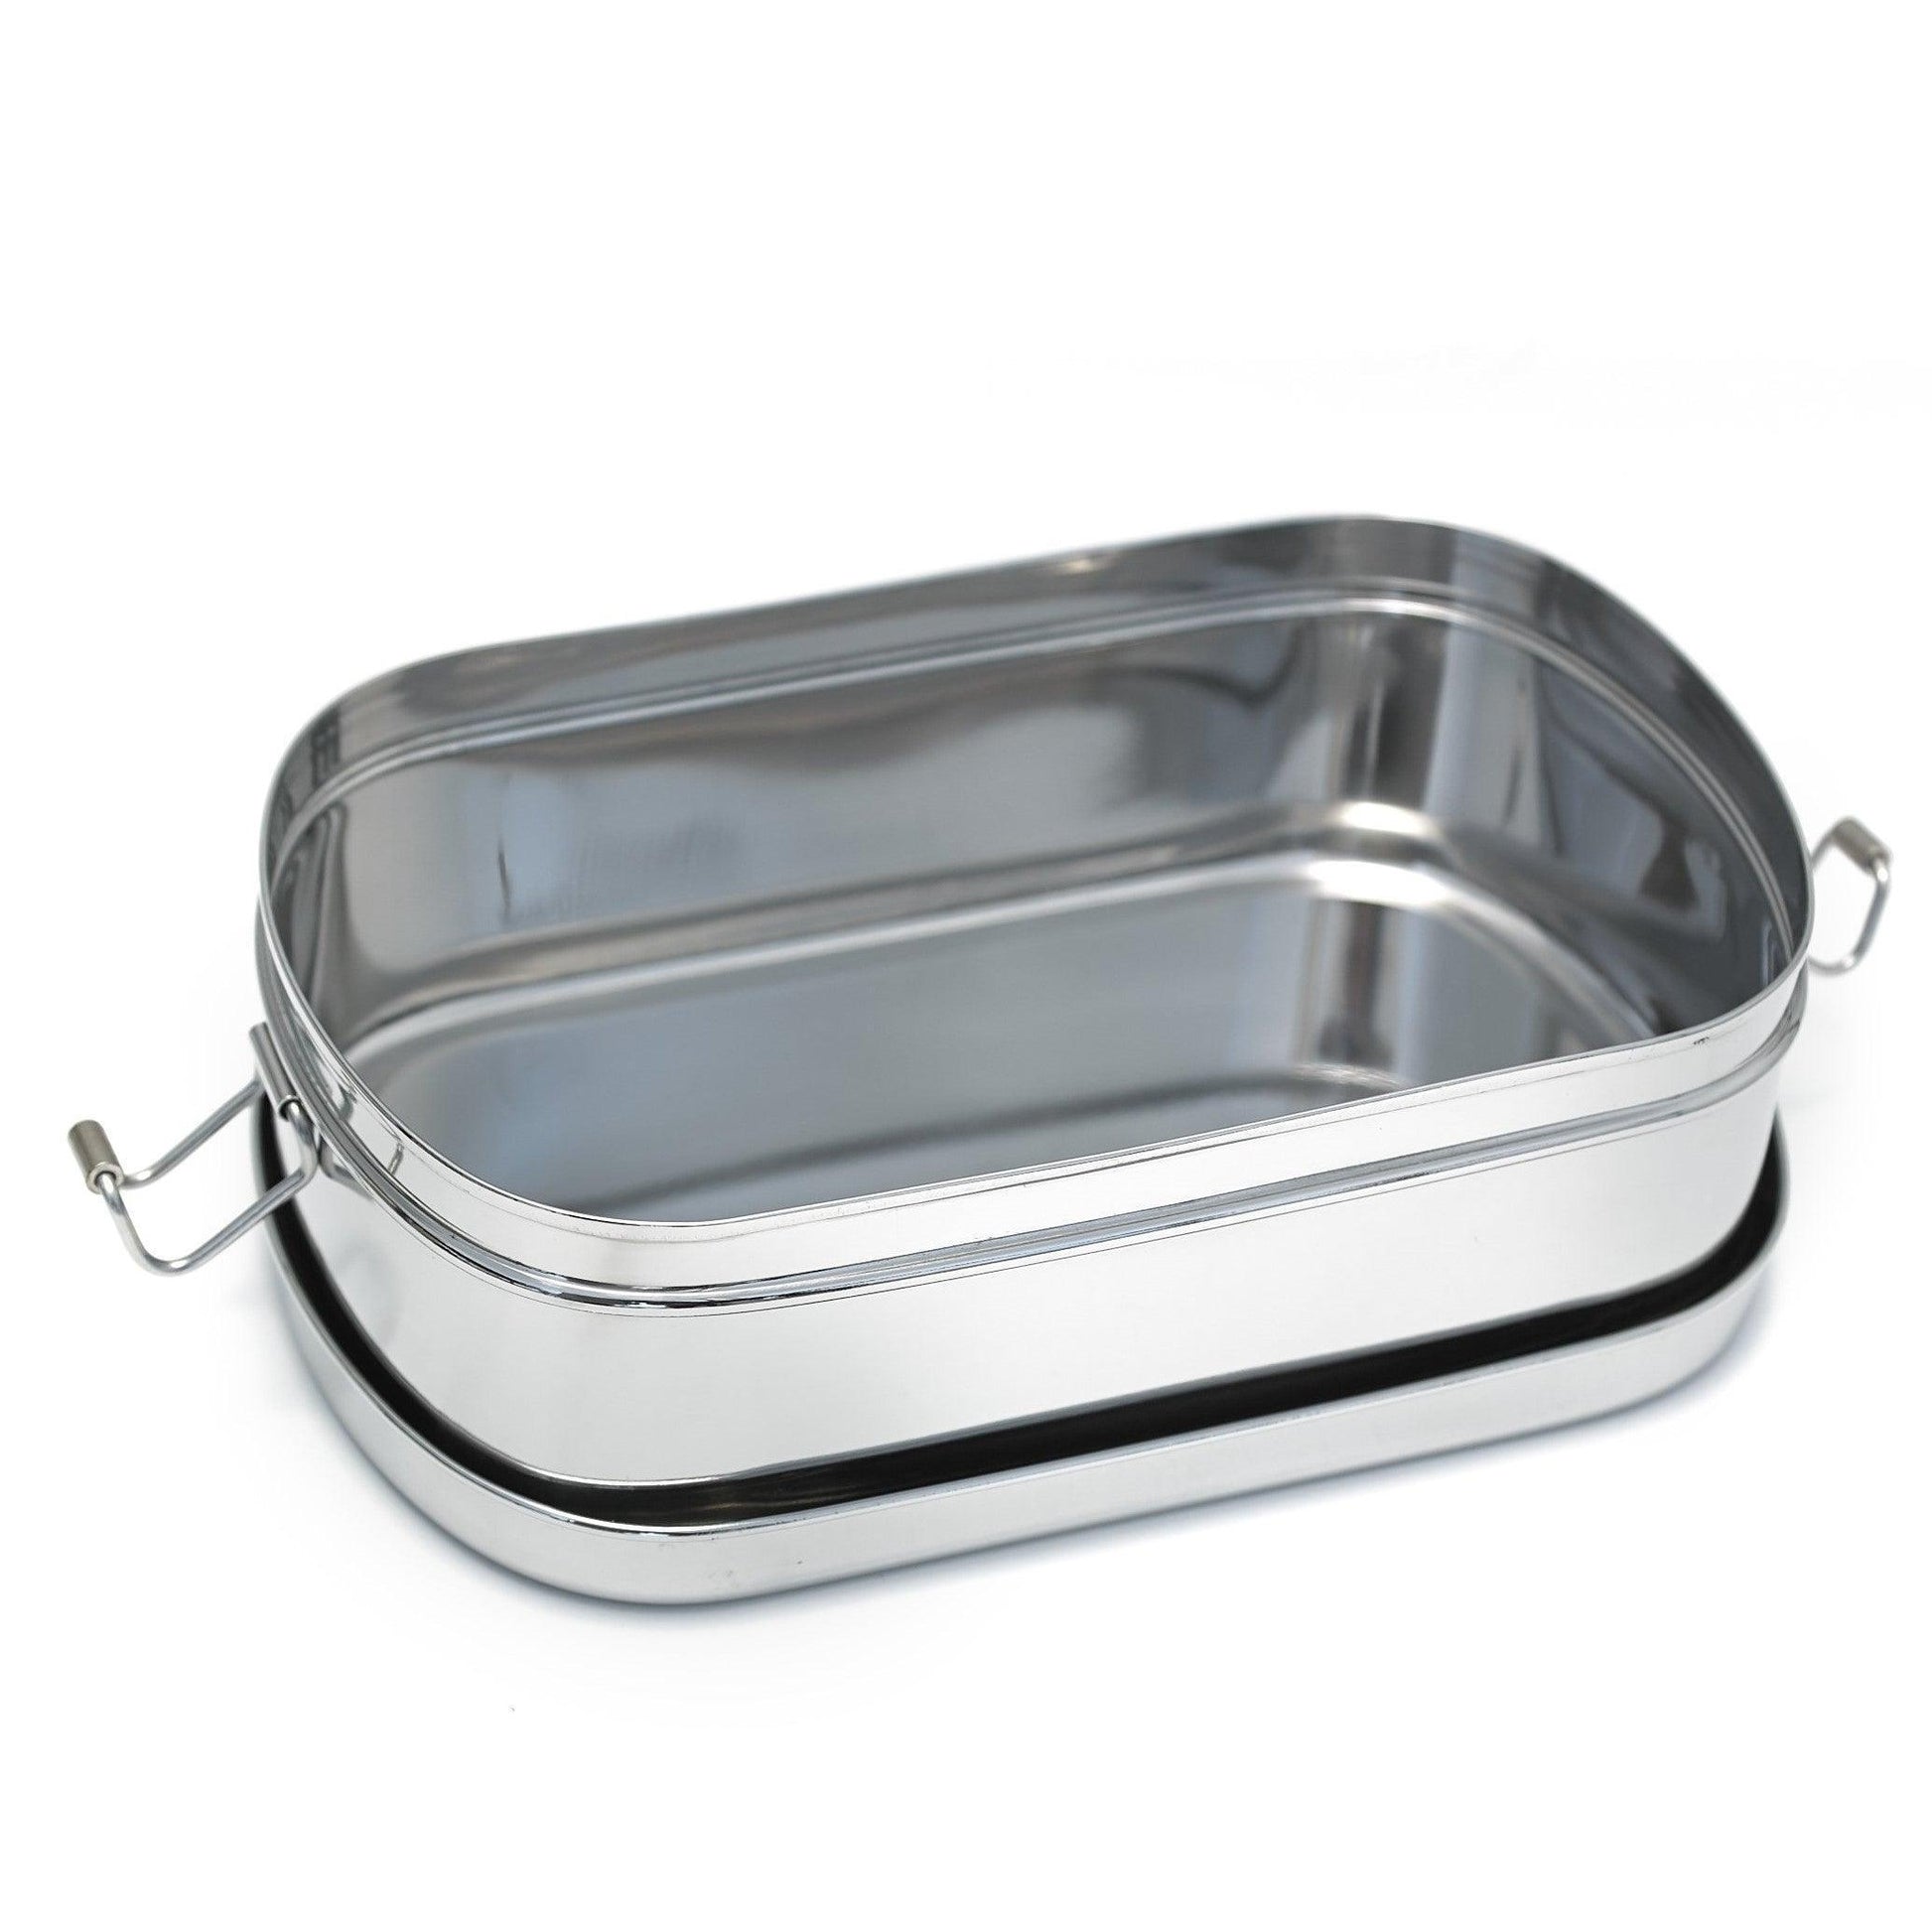 large-oval-shape-lunchbox-or-stainless-steel-meals-in-steel-5